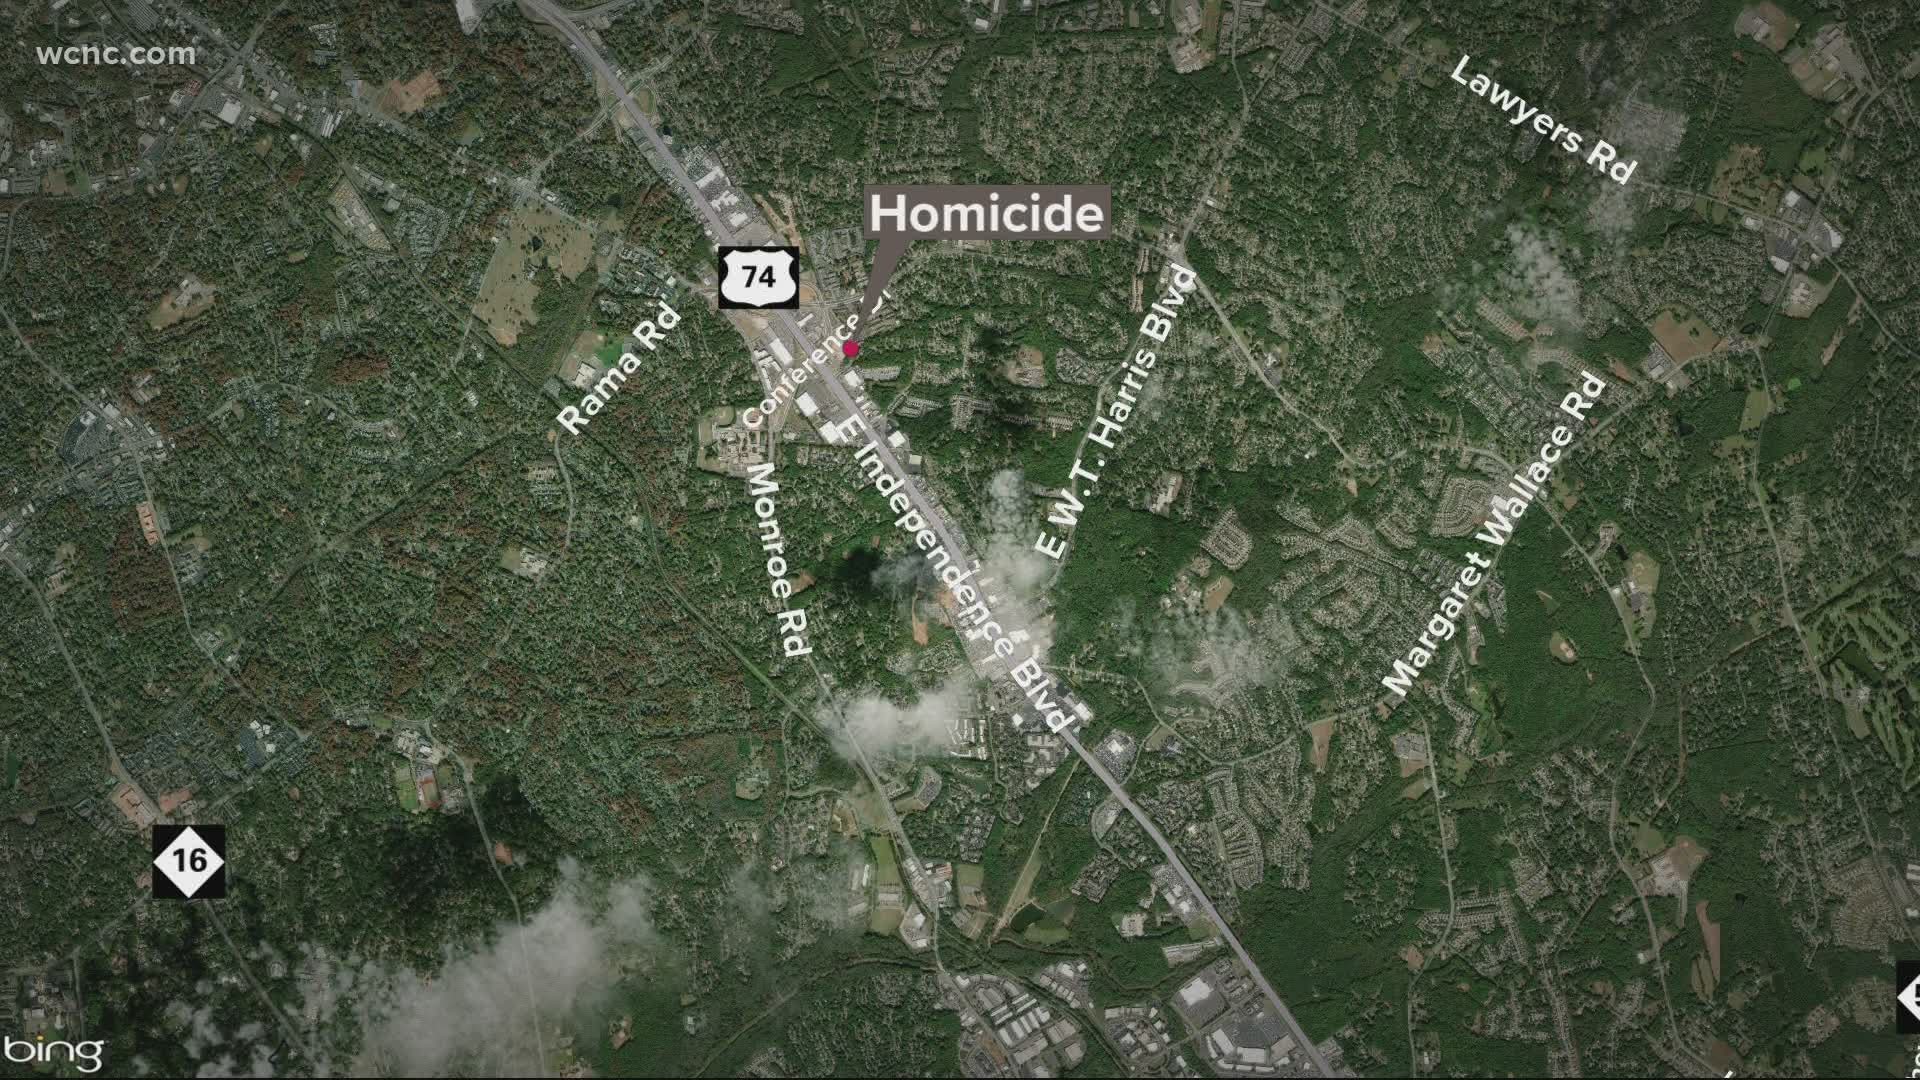 Police are investigating after one person was killed in southeast Charlotte Monday night.